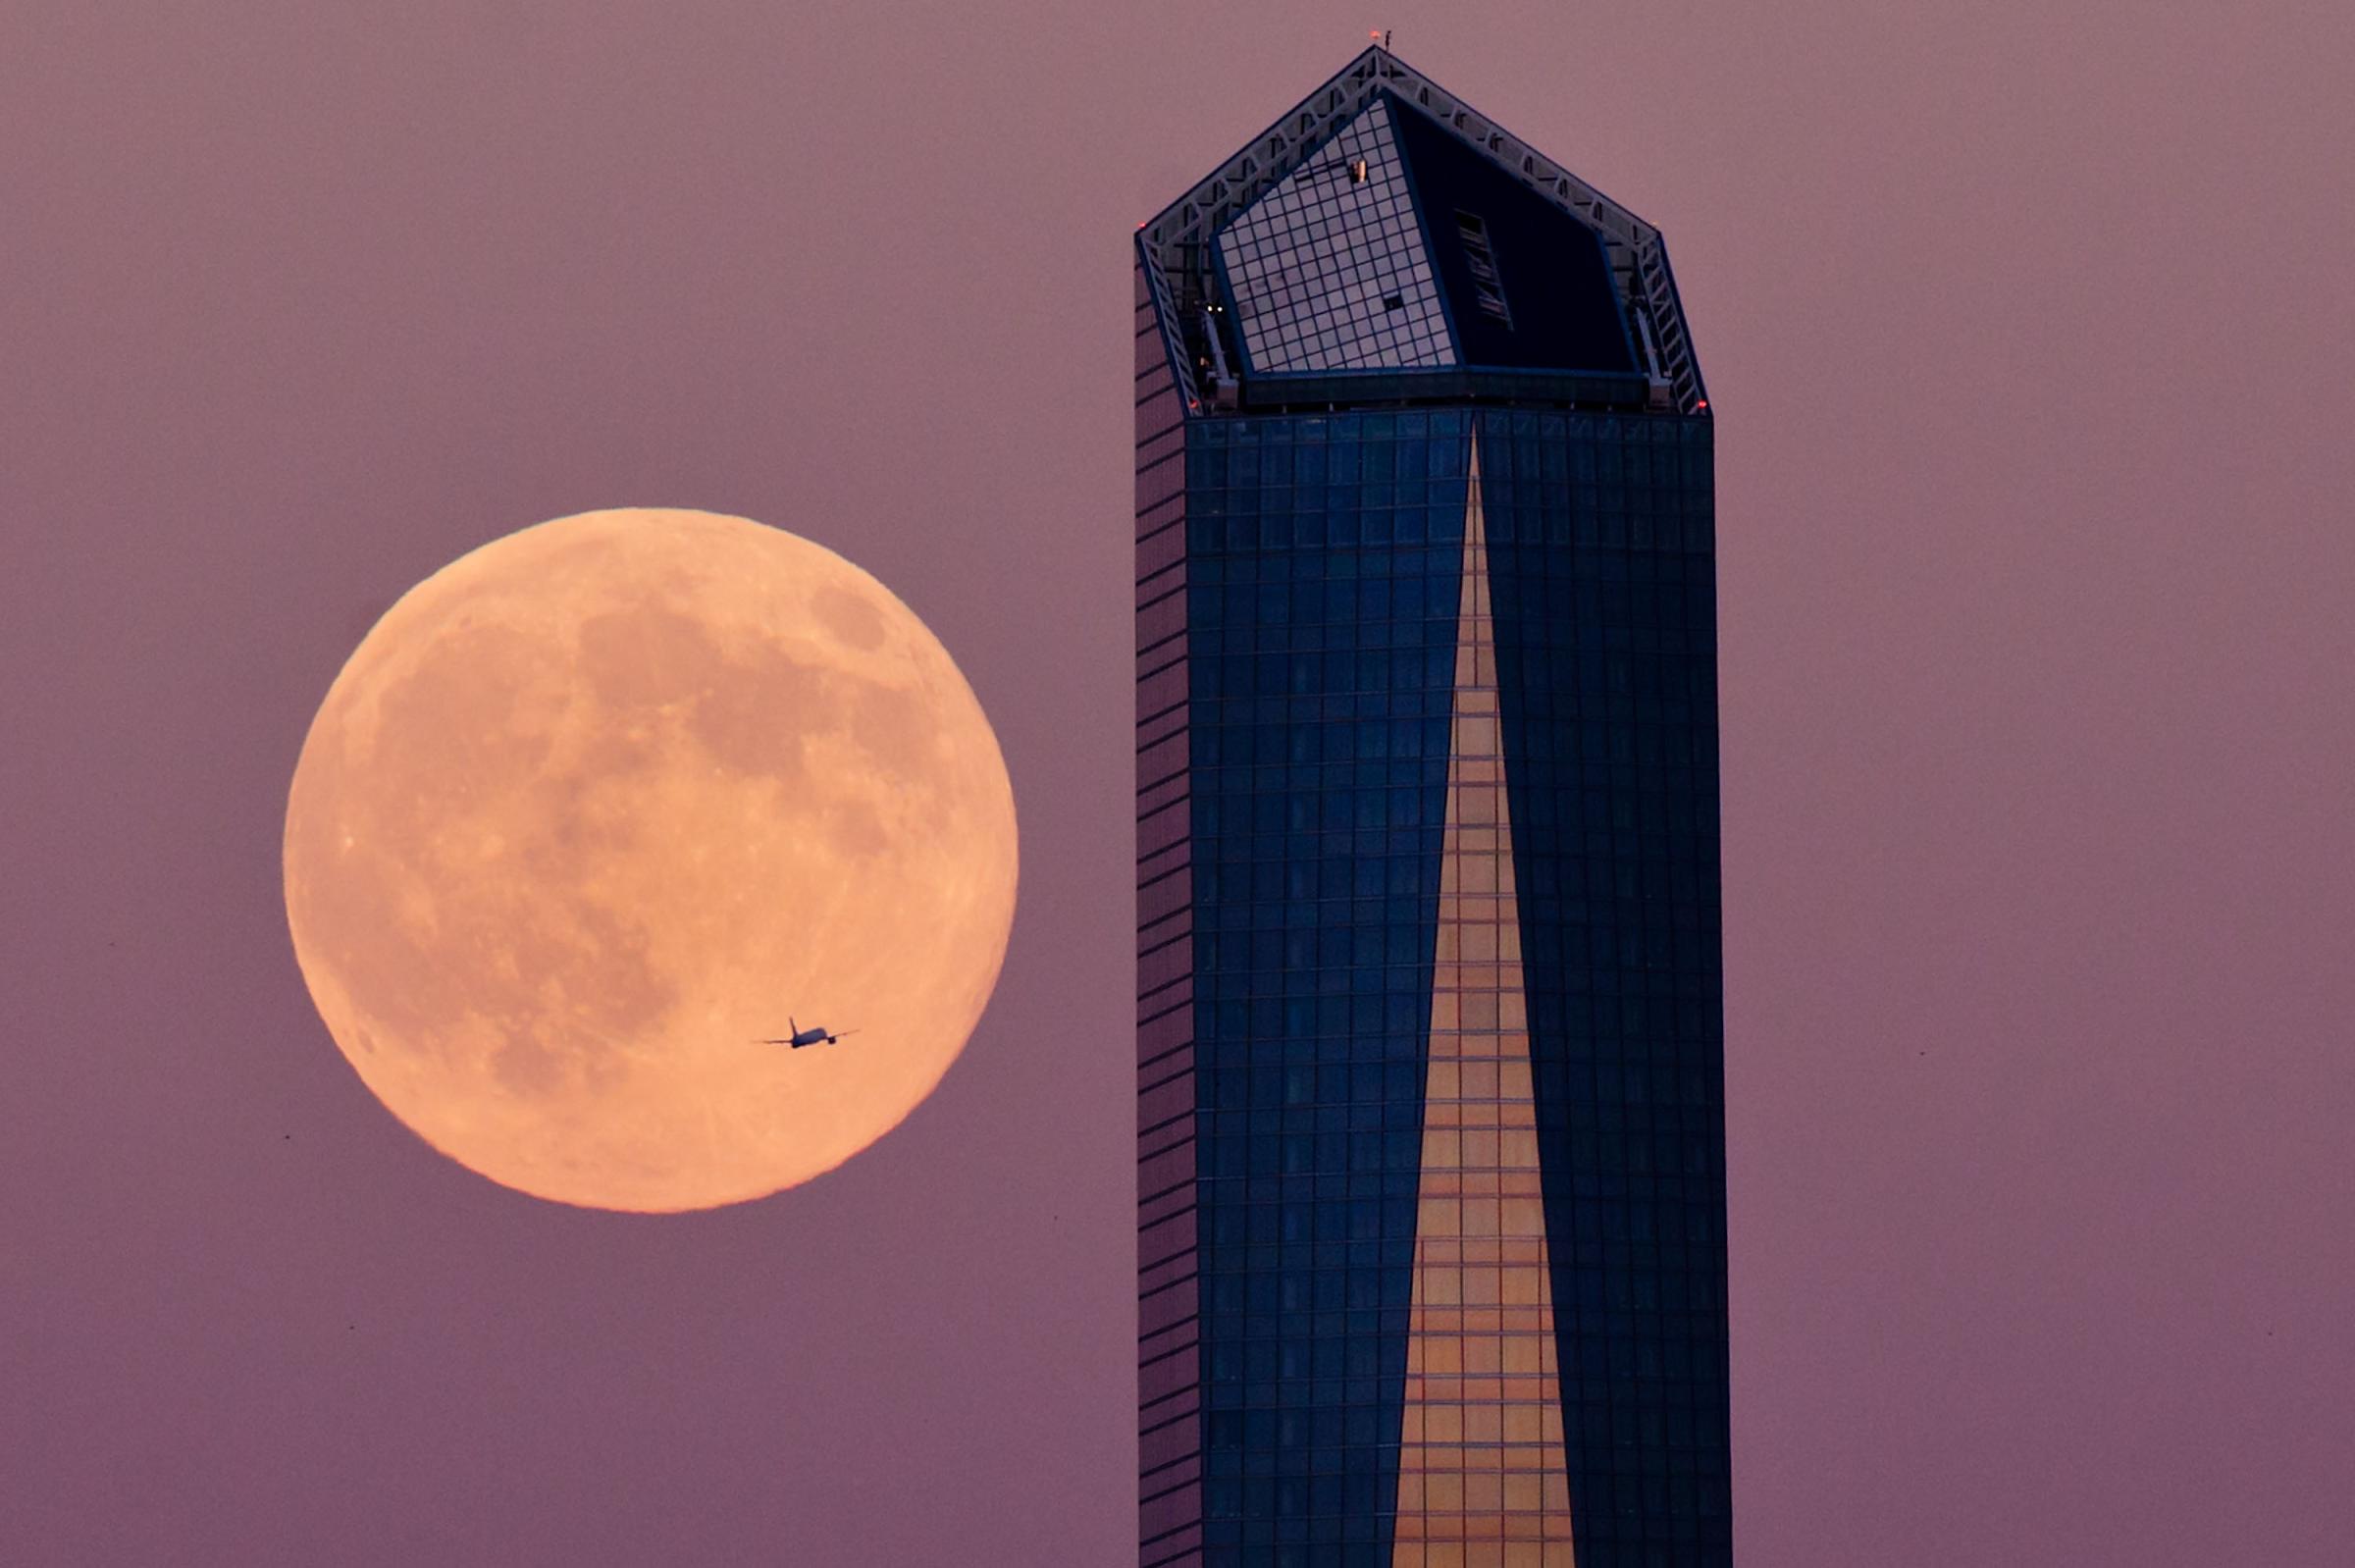 A plane flys across the supermoon surrounded by a Madrid skyscraper on August 9, 2014 in Madrid.